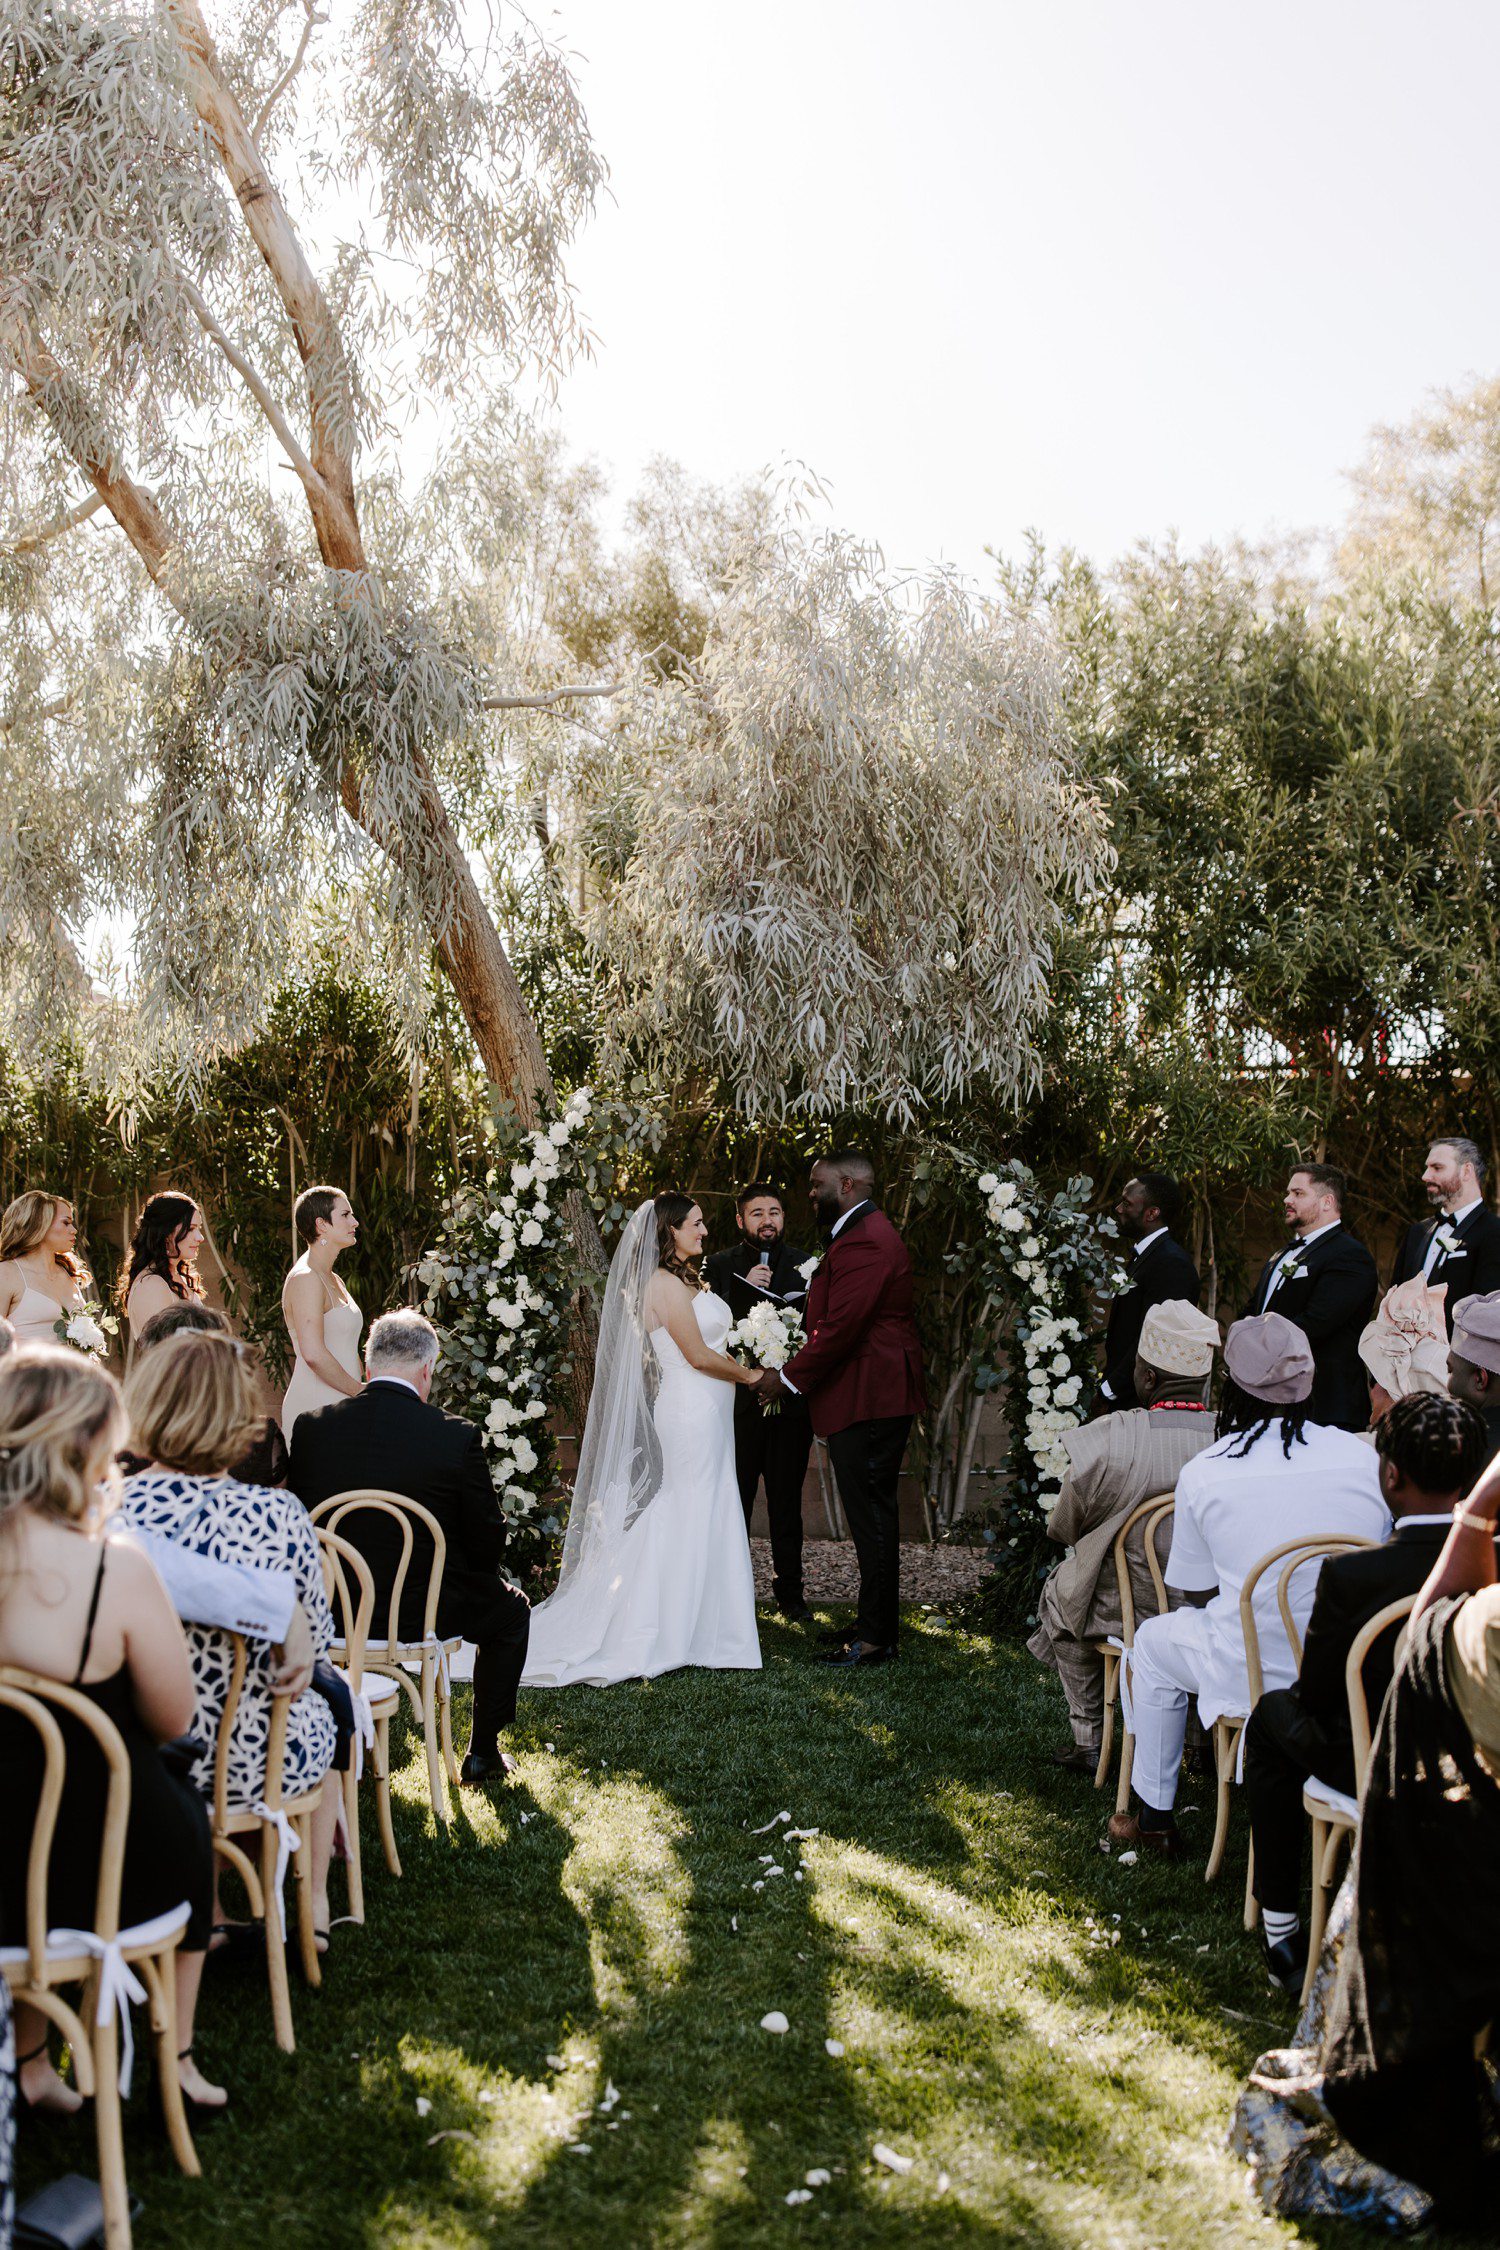 Multicultural Wedding at The Lotus House in Las Vegas with an outdoor wedding ceremony